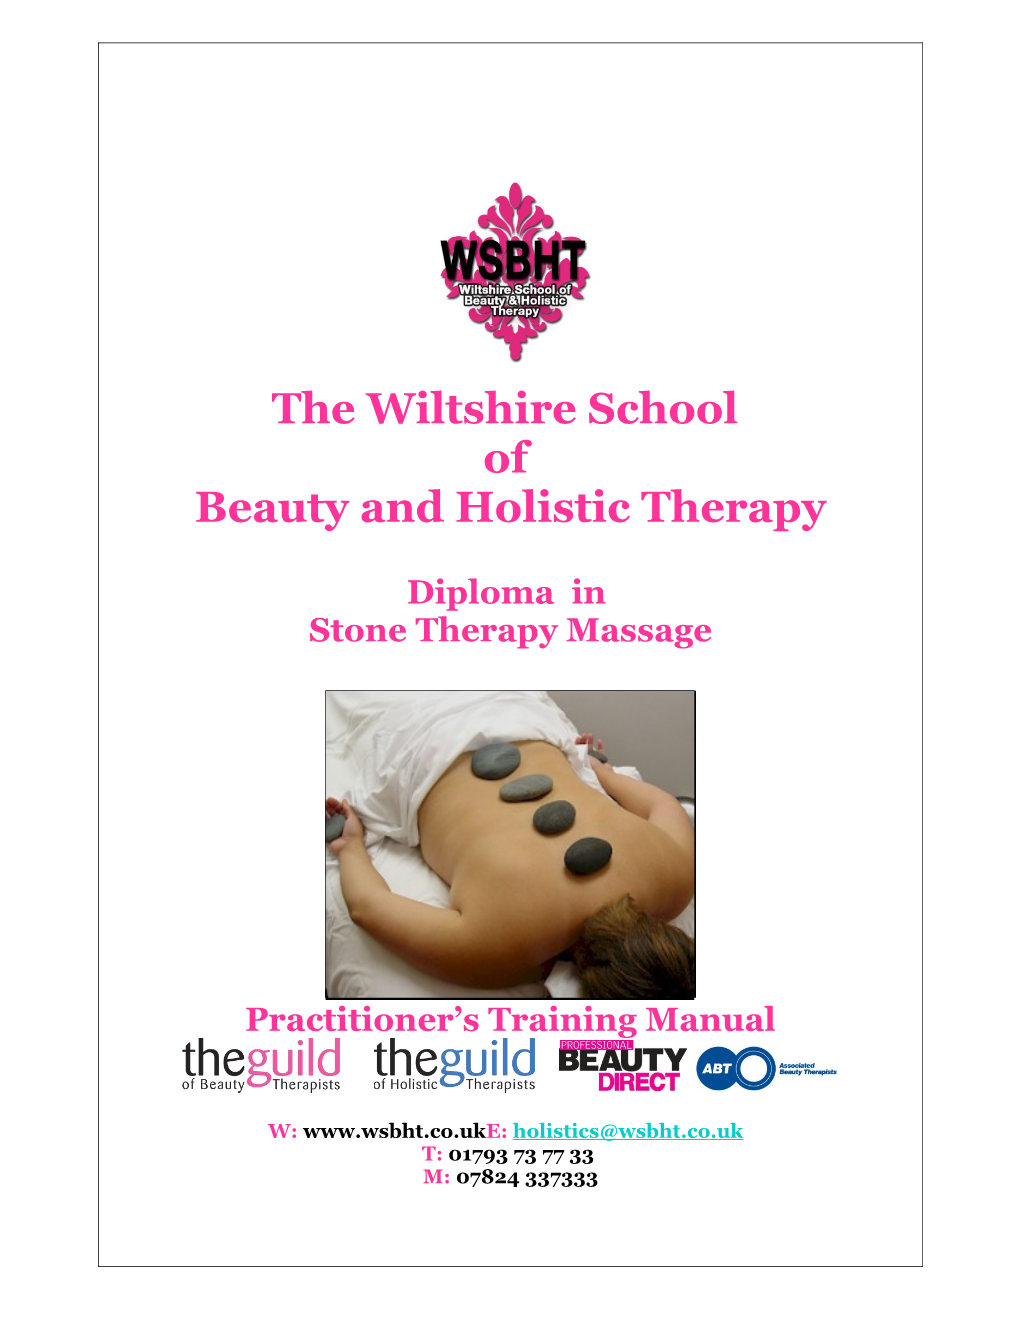 Beauty and Holistic Therapy